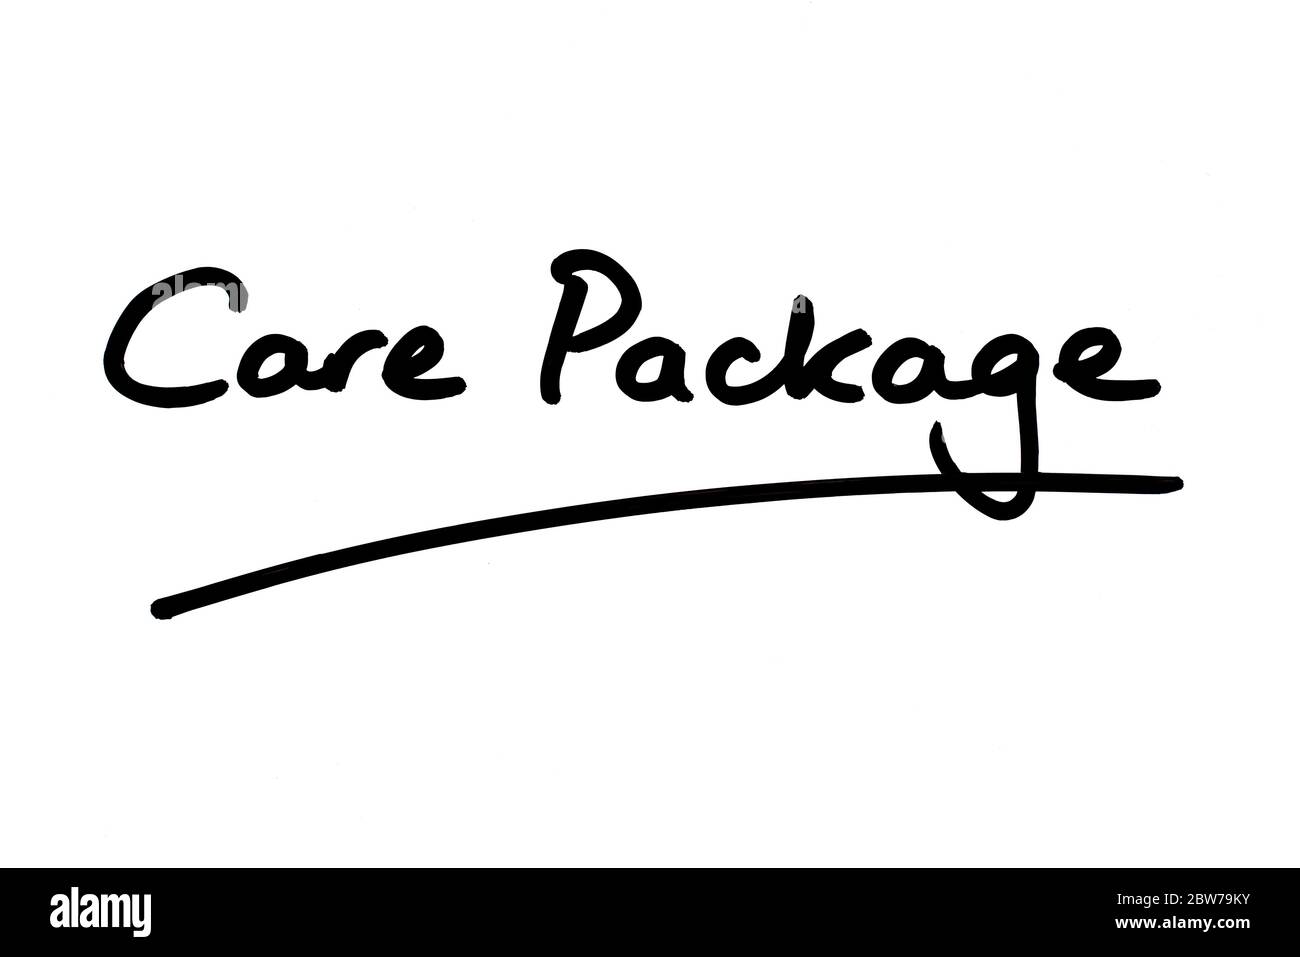 Care Package handwritten on a white background. Stock Photo